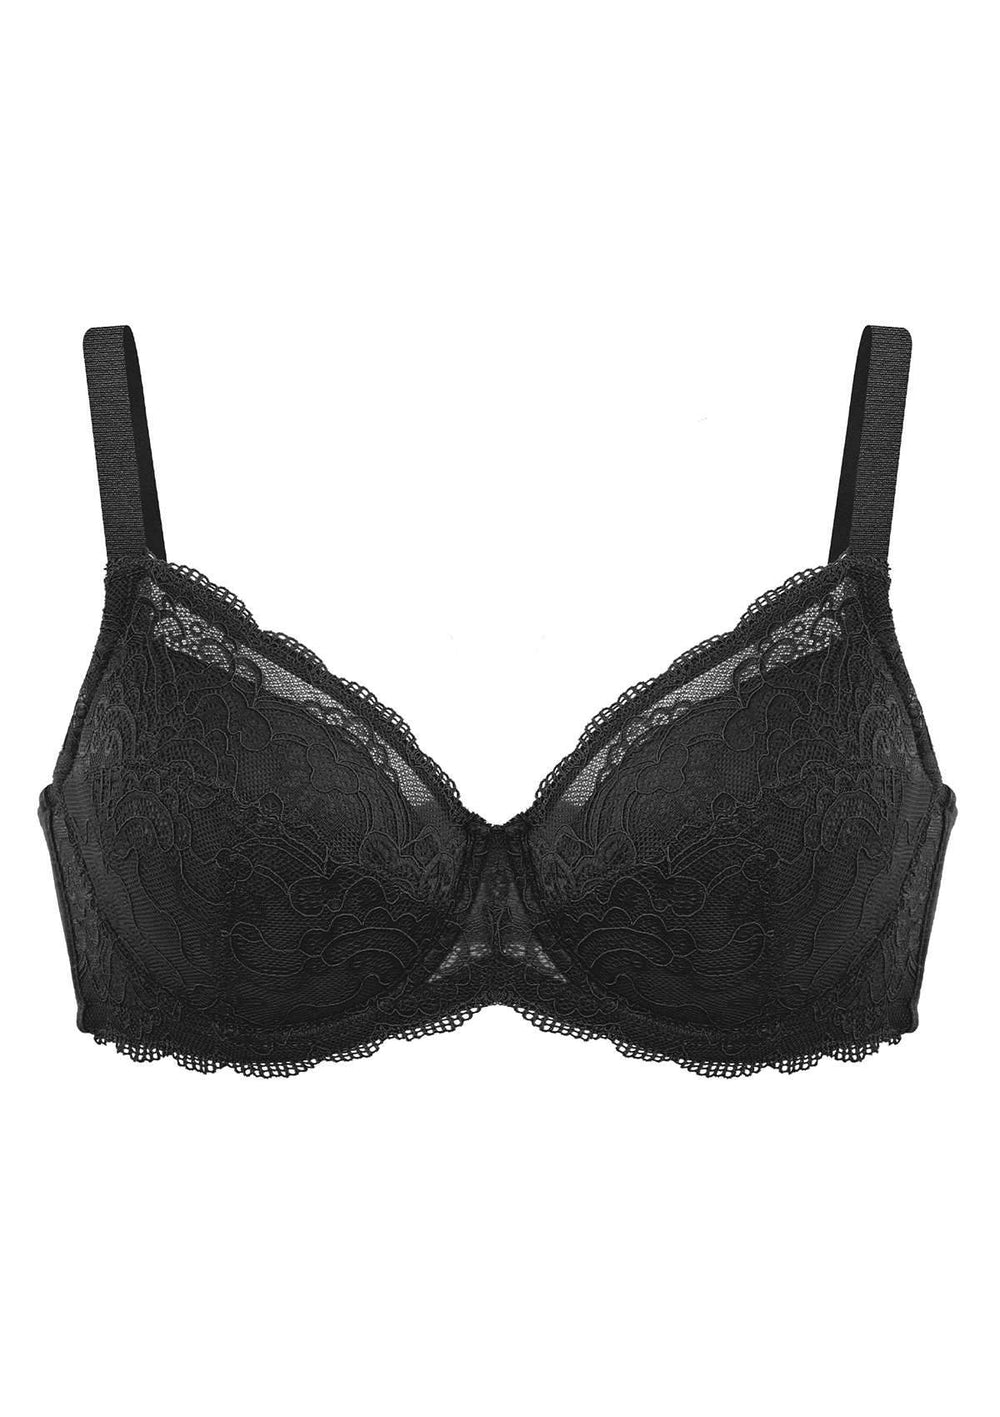 HSIA Lightly Padded Full Figure Full Suppport Lace Bra